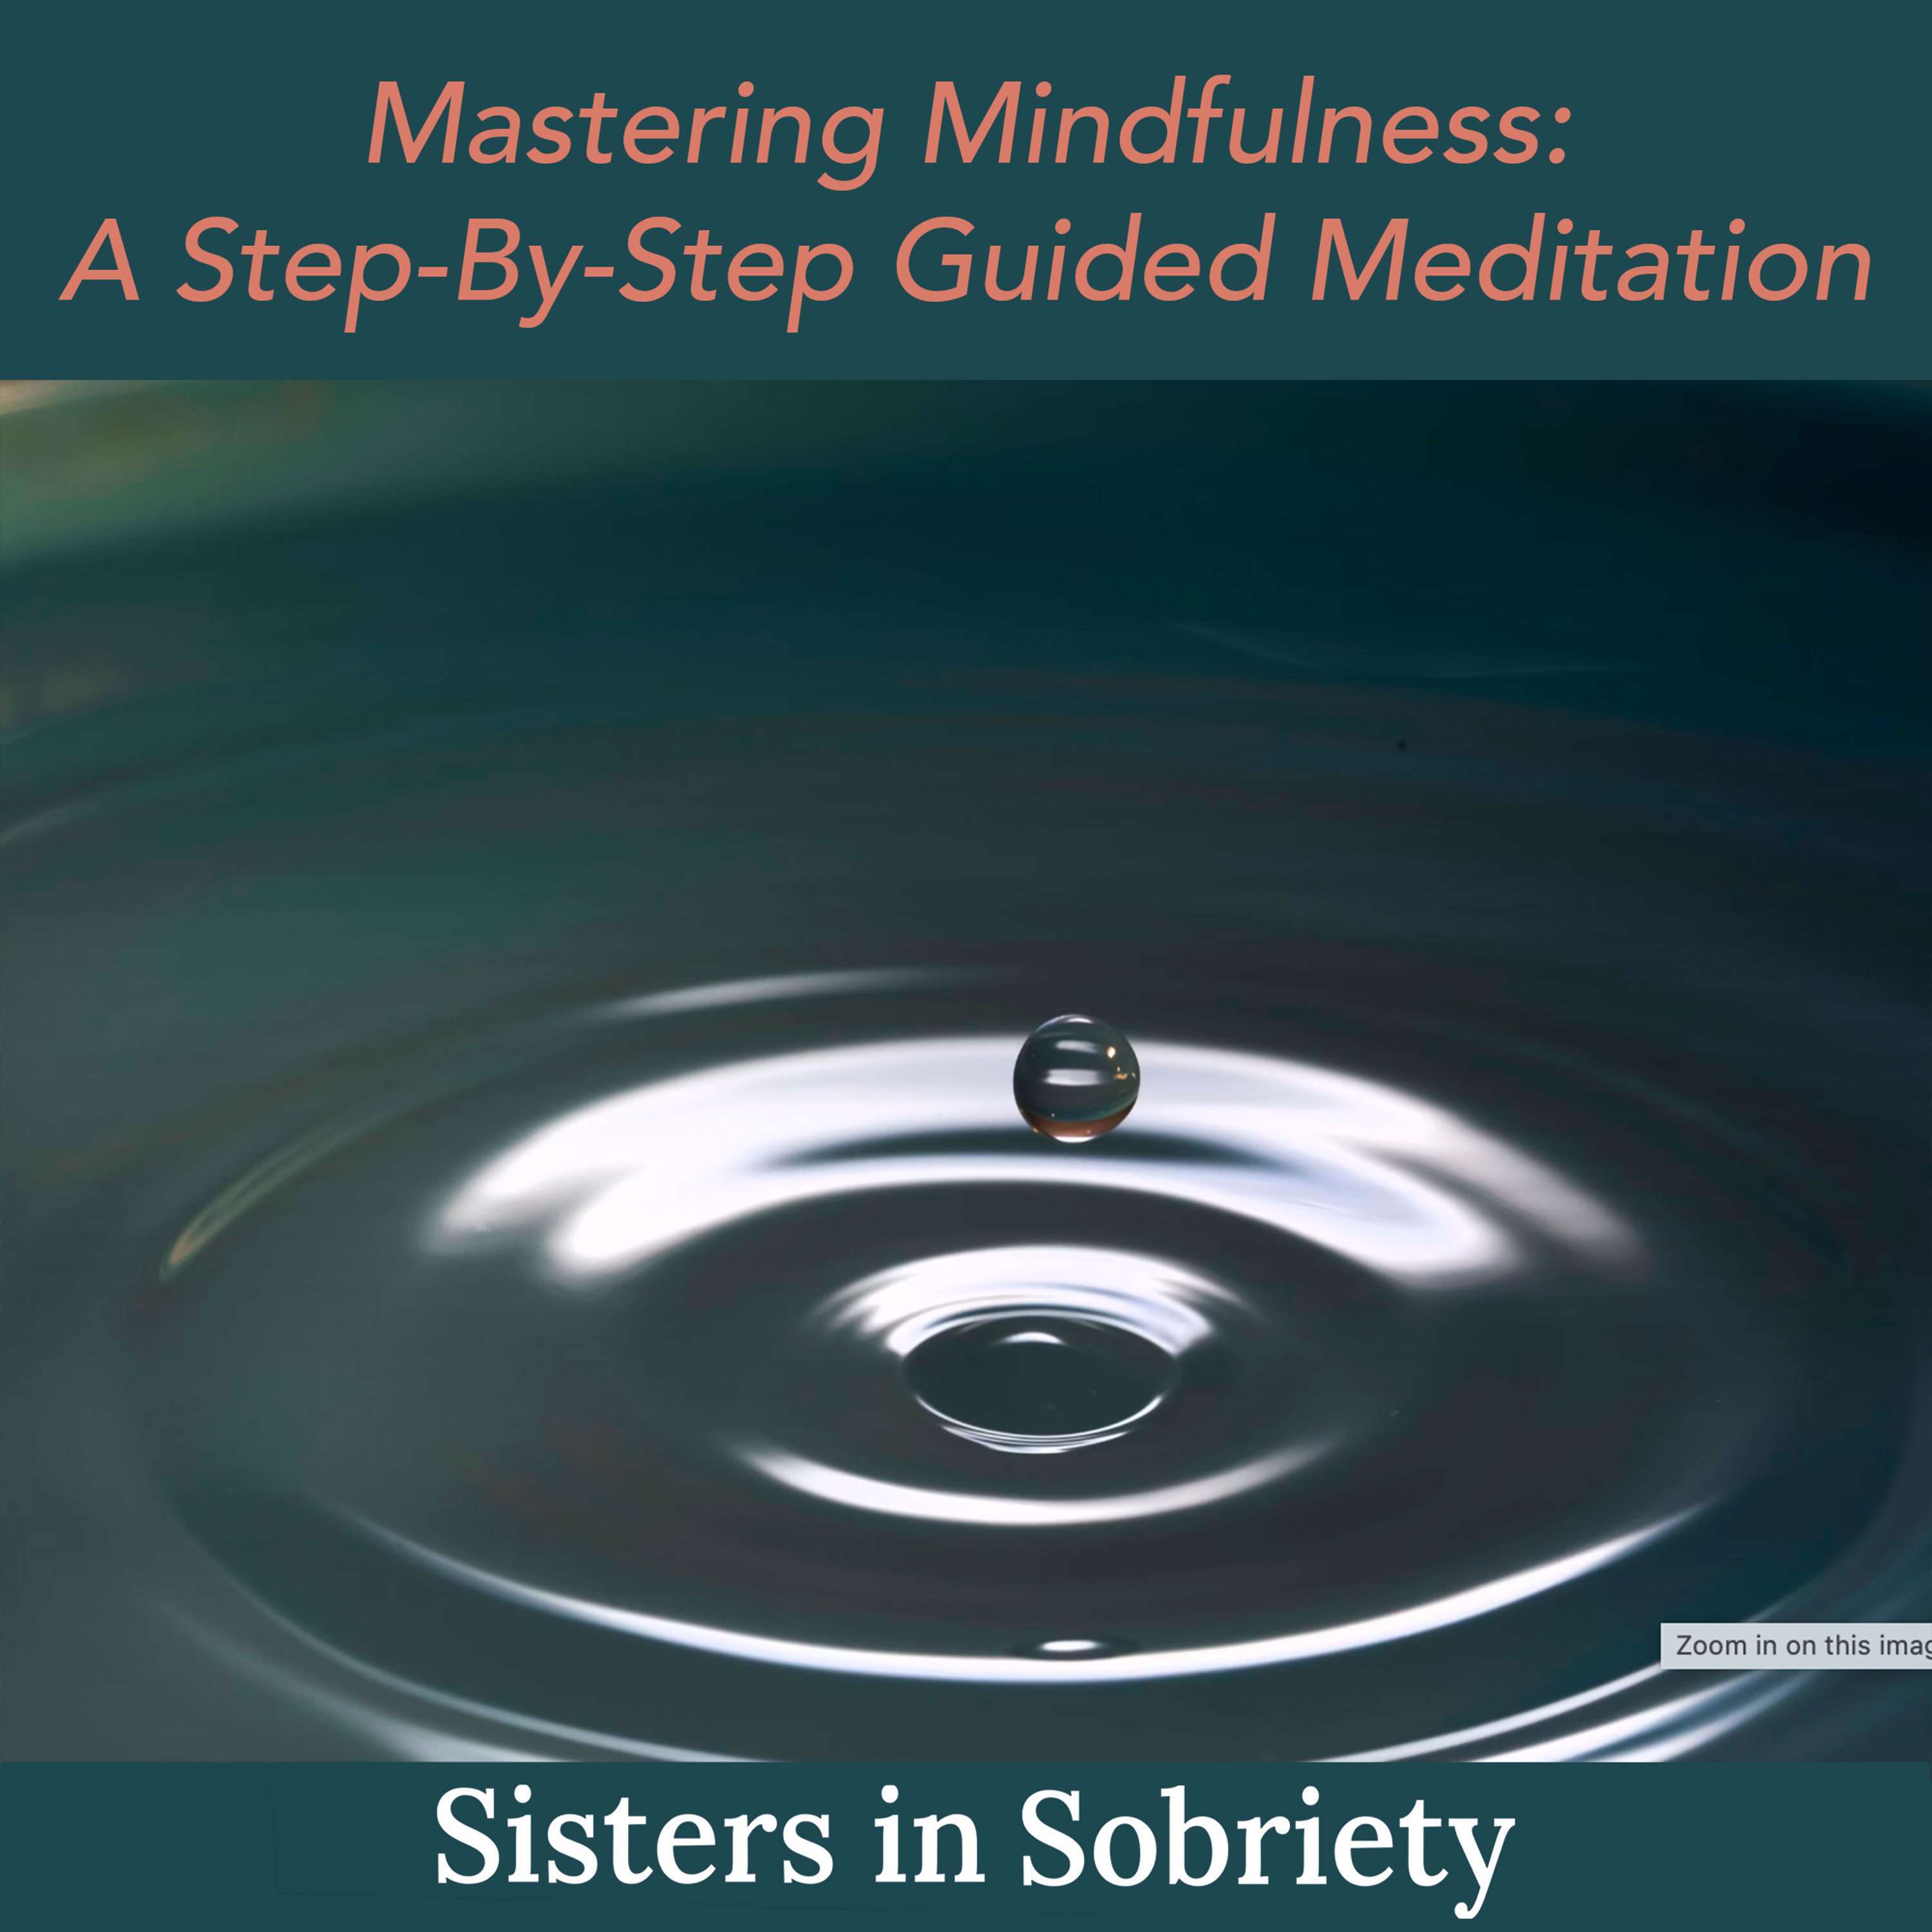 Mastering Mindfulness: A Step-By-Step Guided Meditation